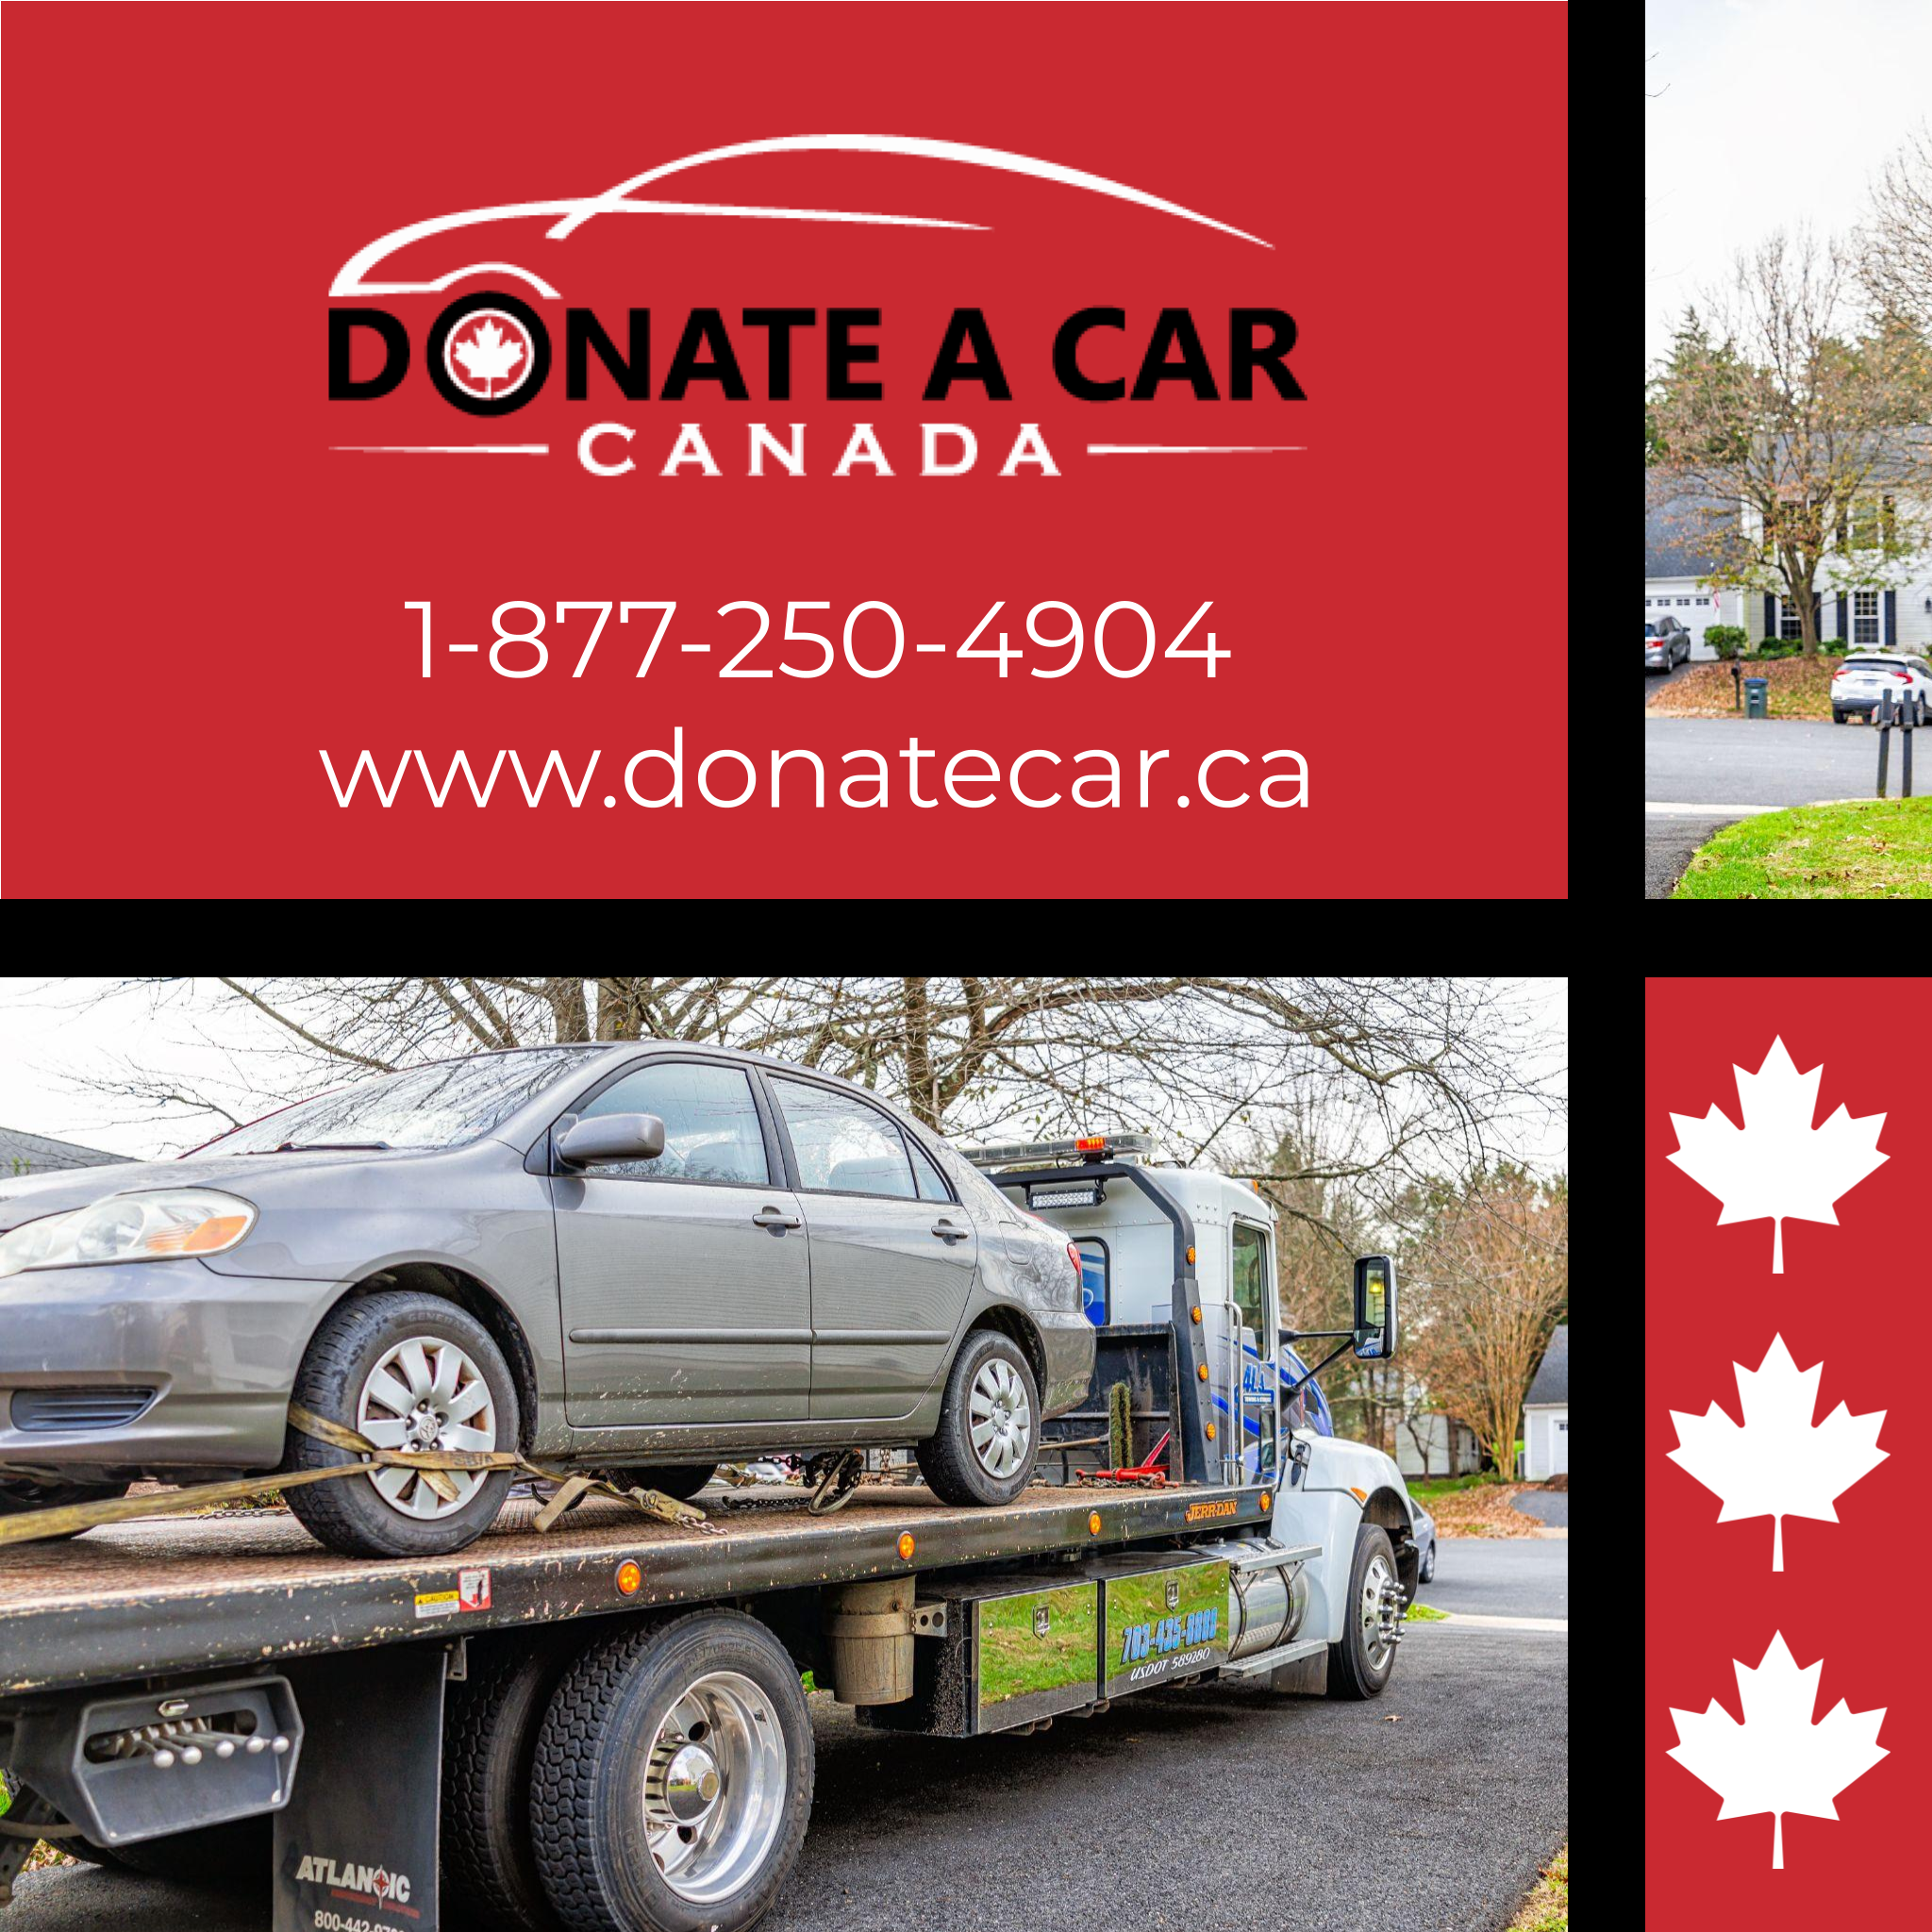 Donate a Car Canada logo phone number 18772504904 and web address on cherry red background with image of a flatbed tow truck carrying a grey sedan transportation and free tow for donated vehicles